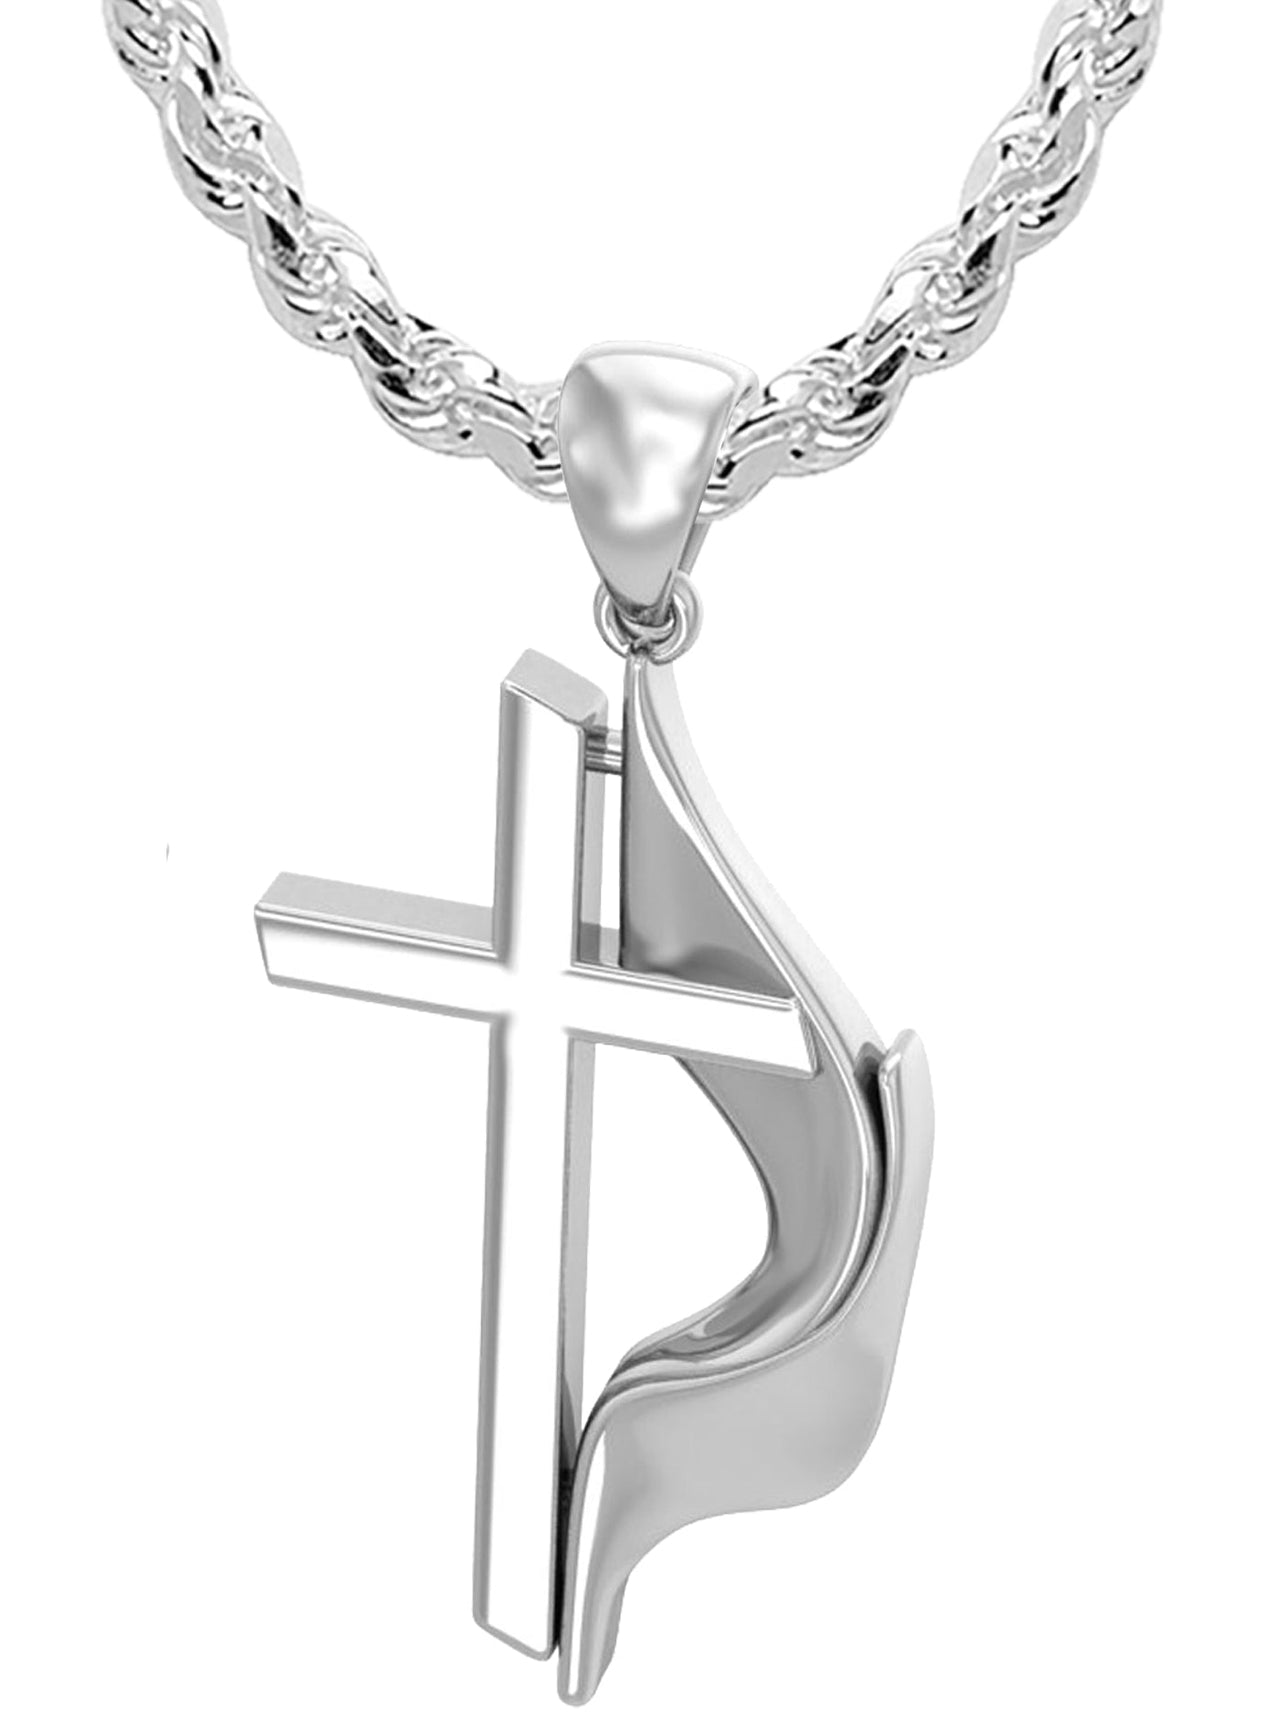 Extra Large Heavy Men's 925 Sterling Silver Nautical Boat Anchor Pendant Necklace, 50mm 22in 3.6mm Rope